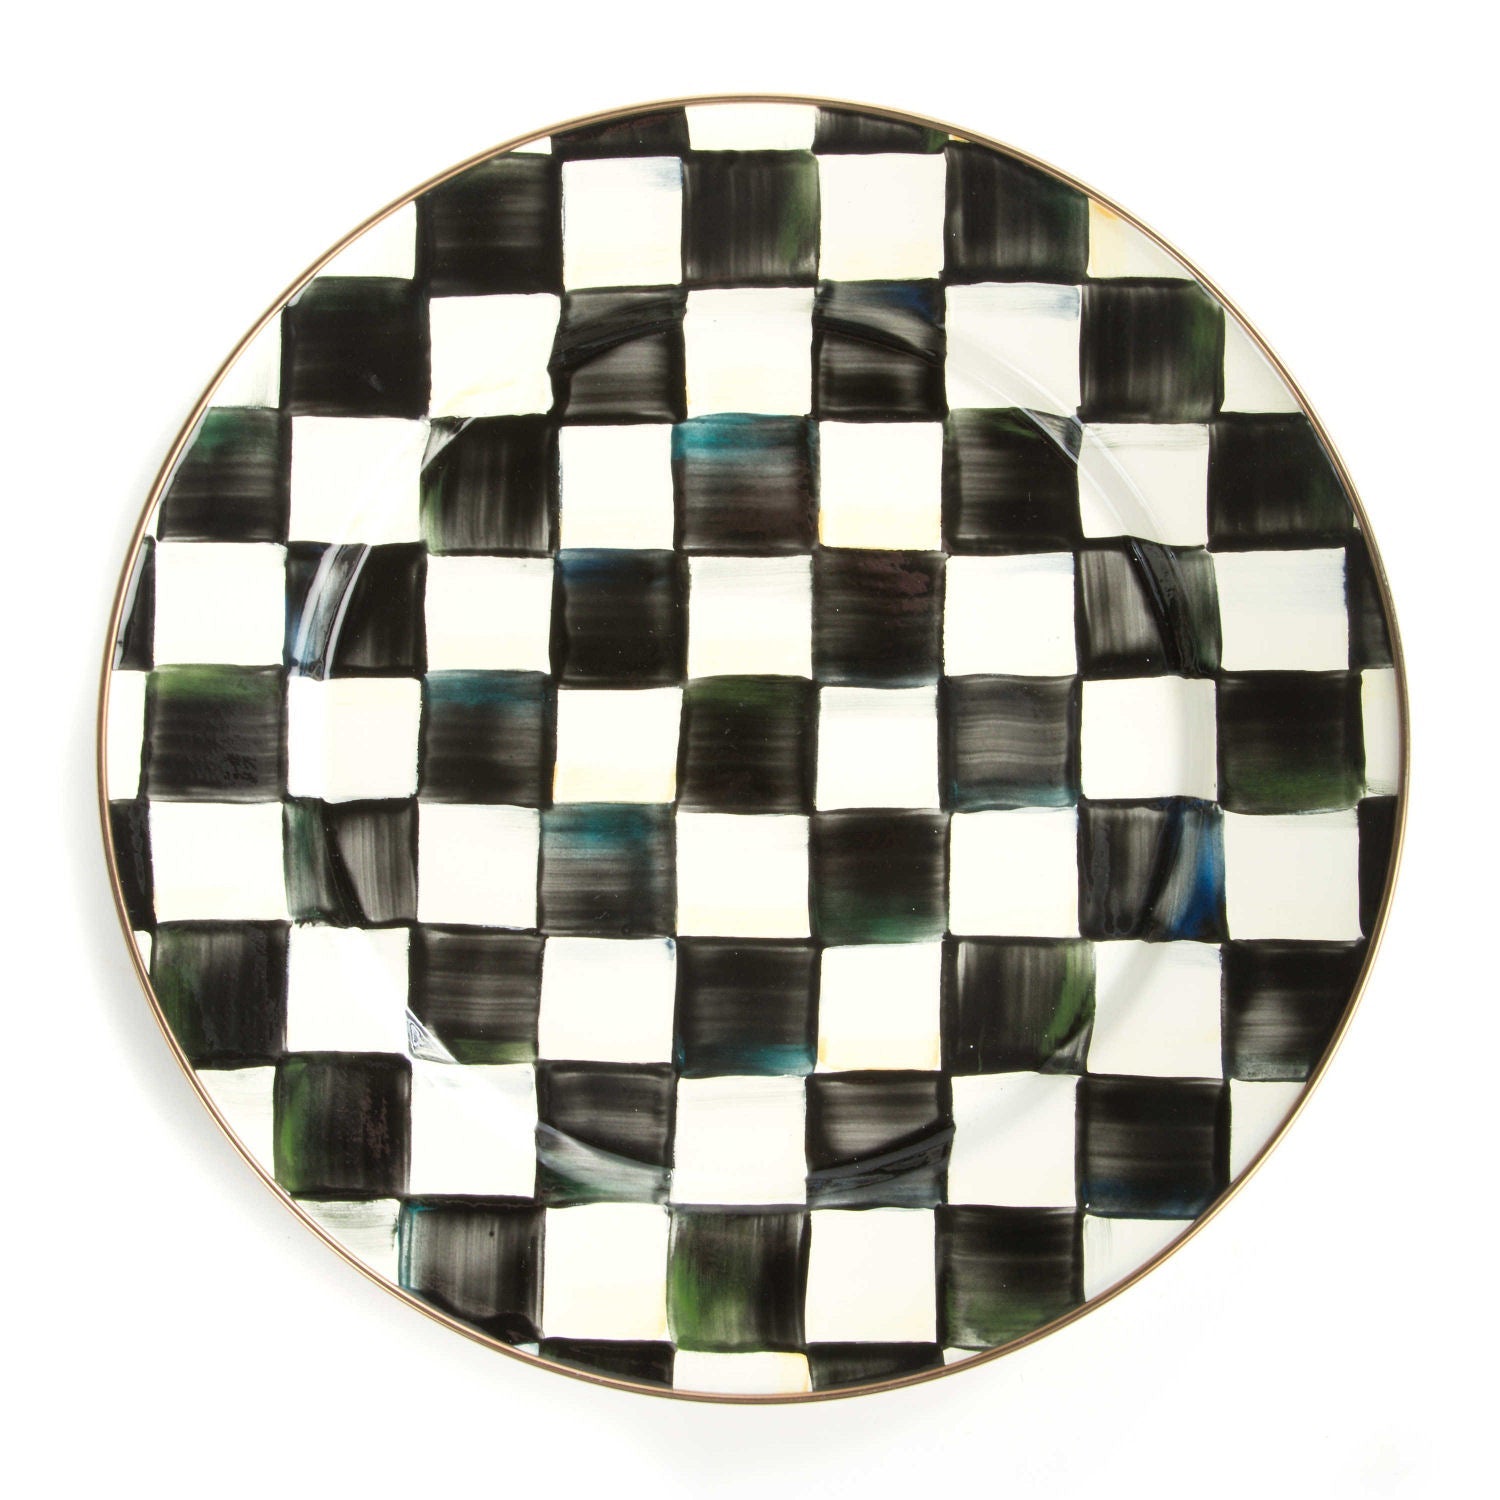 MacKenzie - Childs Courtly Check Charger/Plate - |VESIMI Design| Luxury Bathrooms and Home Decor